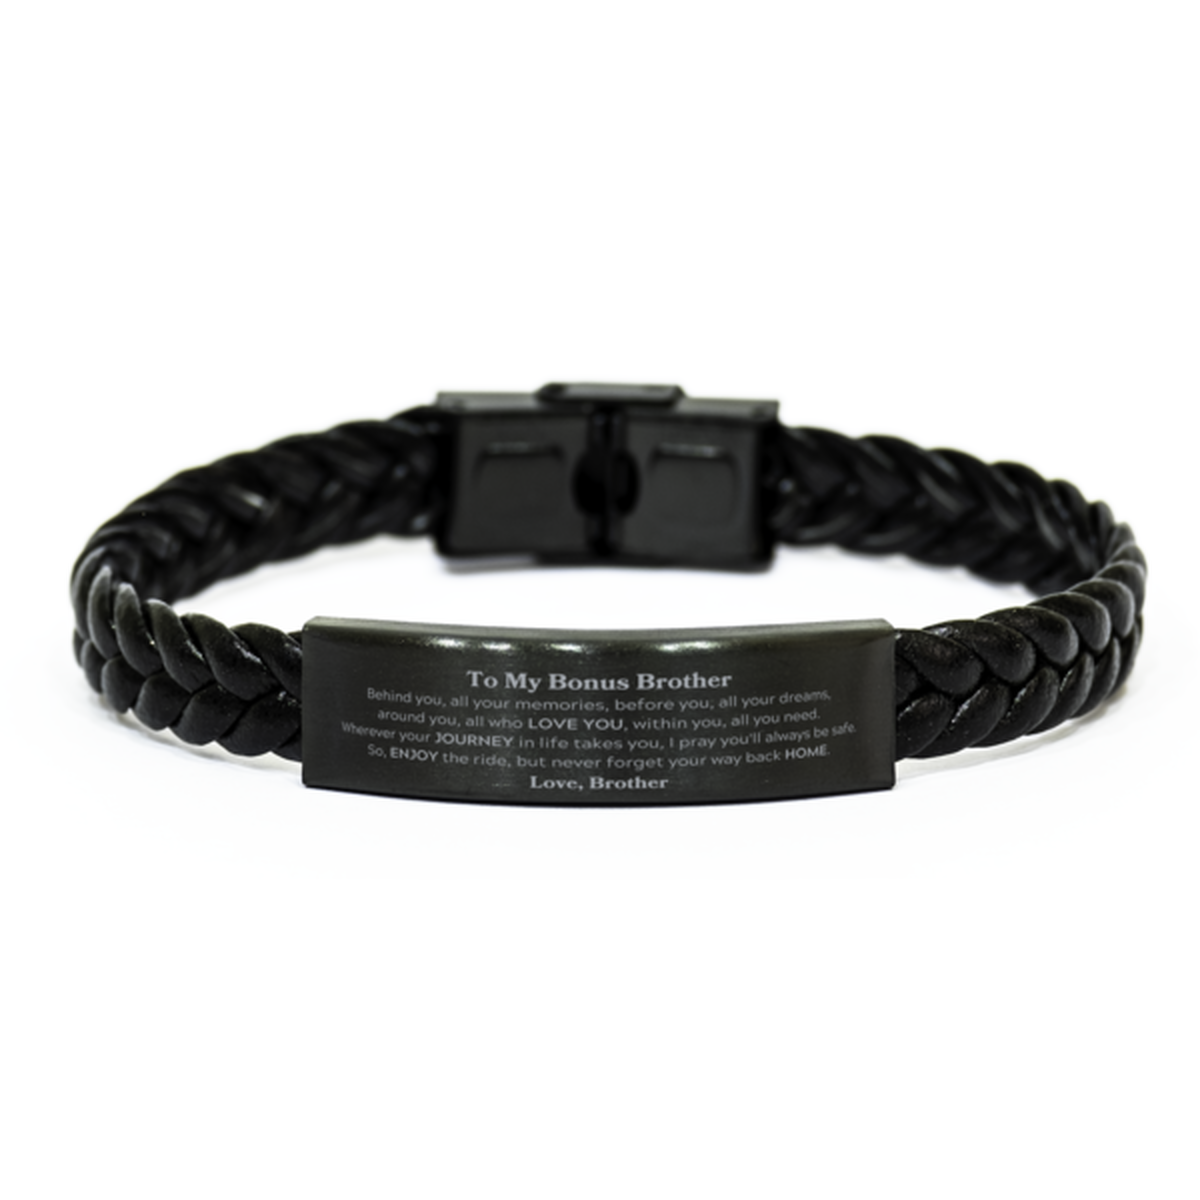 To My Bonus Brother Graduation Gifts from Brother, Bonus Brother Braided Leather Bracelet Christmas Birthday Gifts for Bonus Brother Behind you, all your memories, before you, all your dreams. Love, Brother